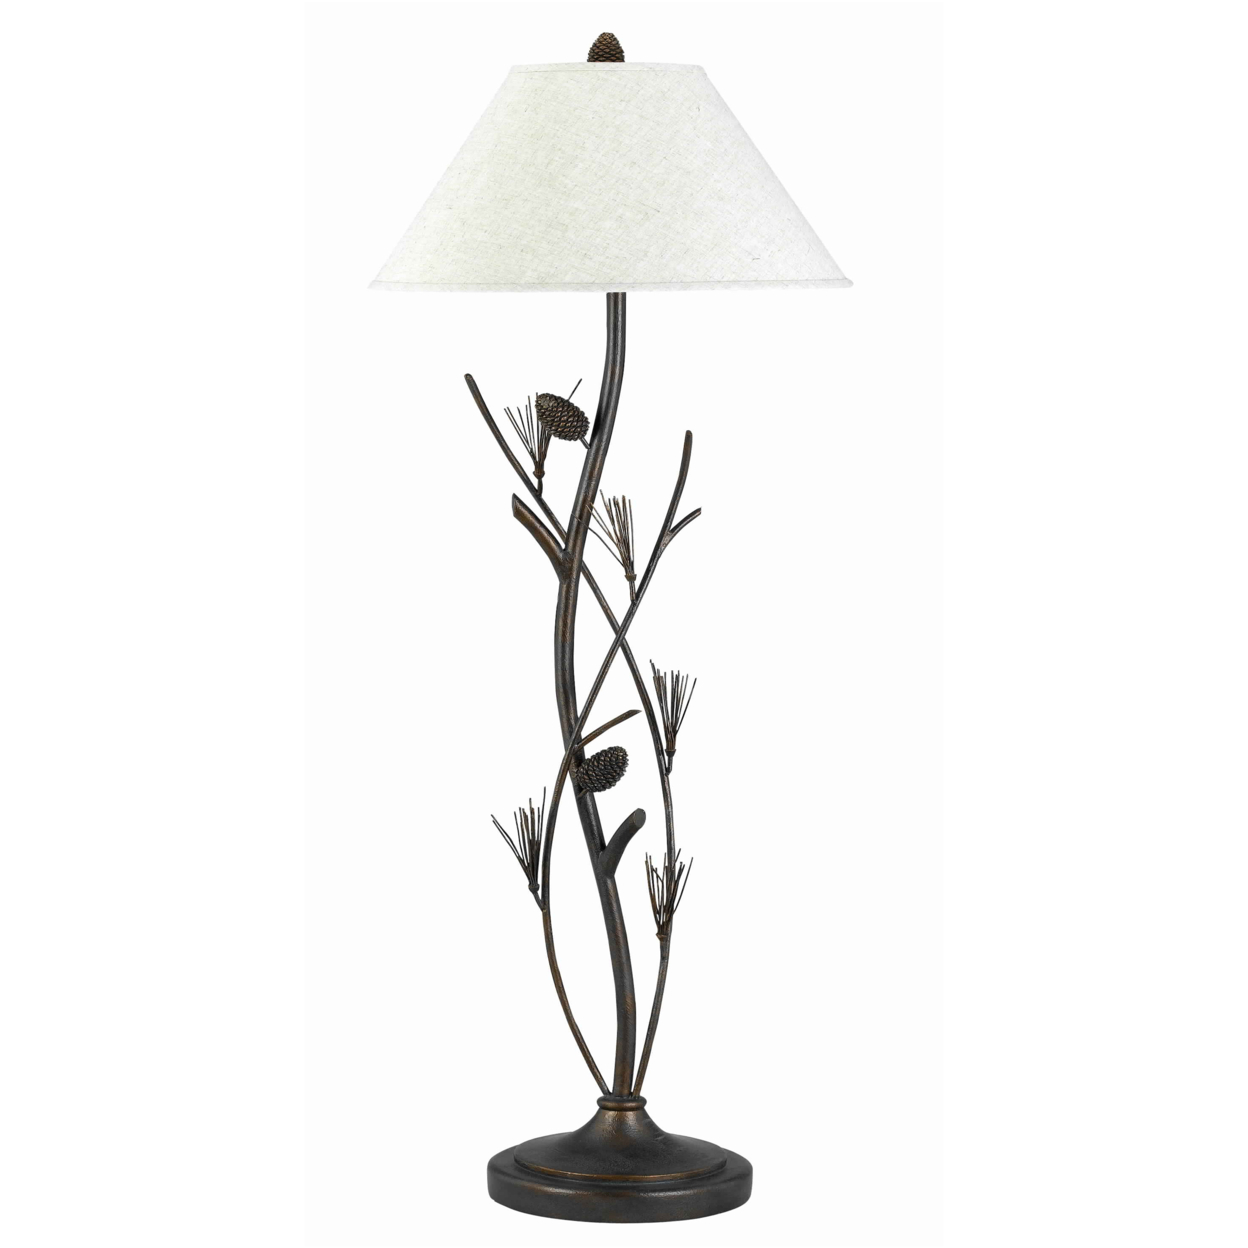 Pine Twig Accent Metal Body Floor Lamp With Conical Shade, Bronze And White- Saltoro Sherpi